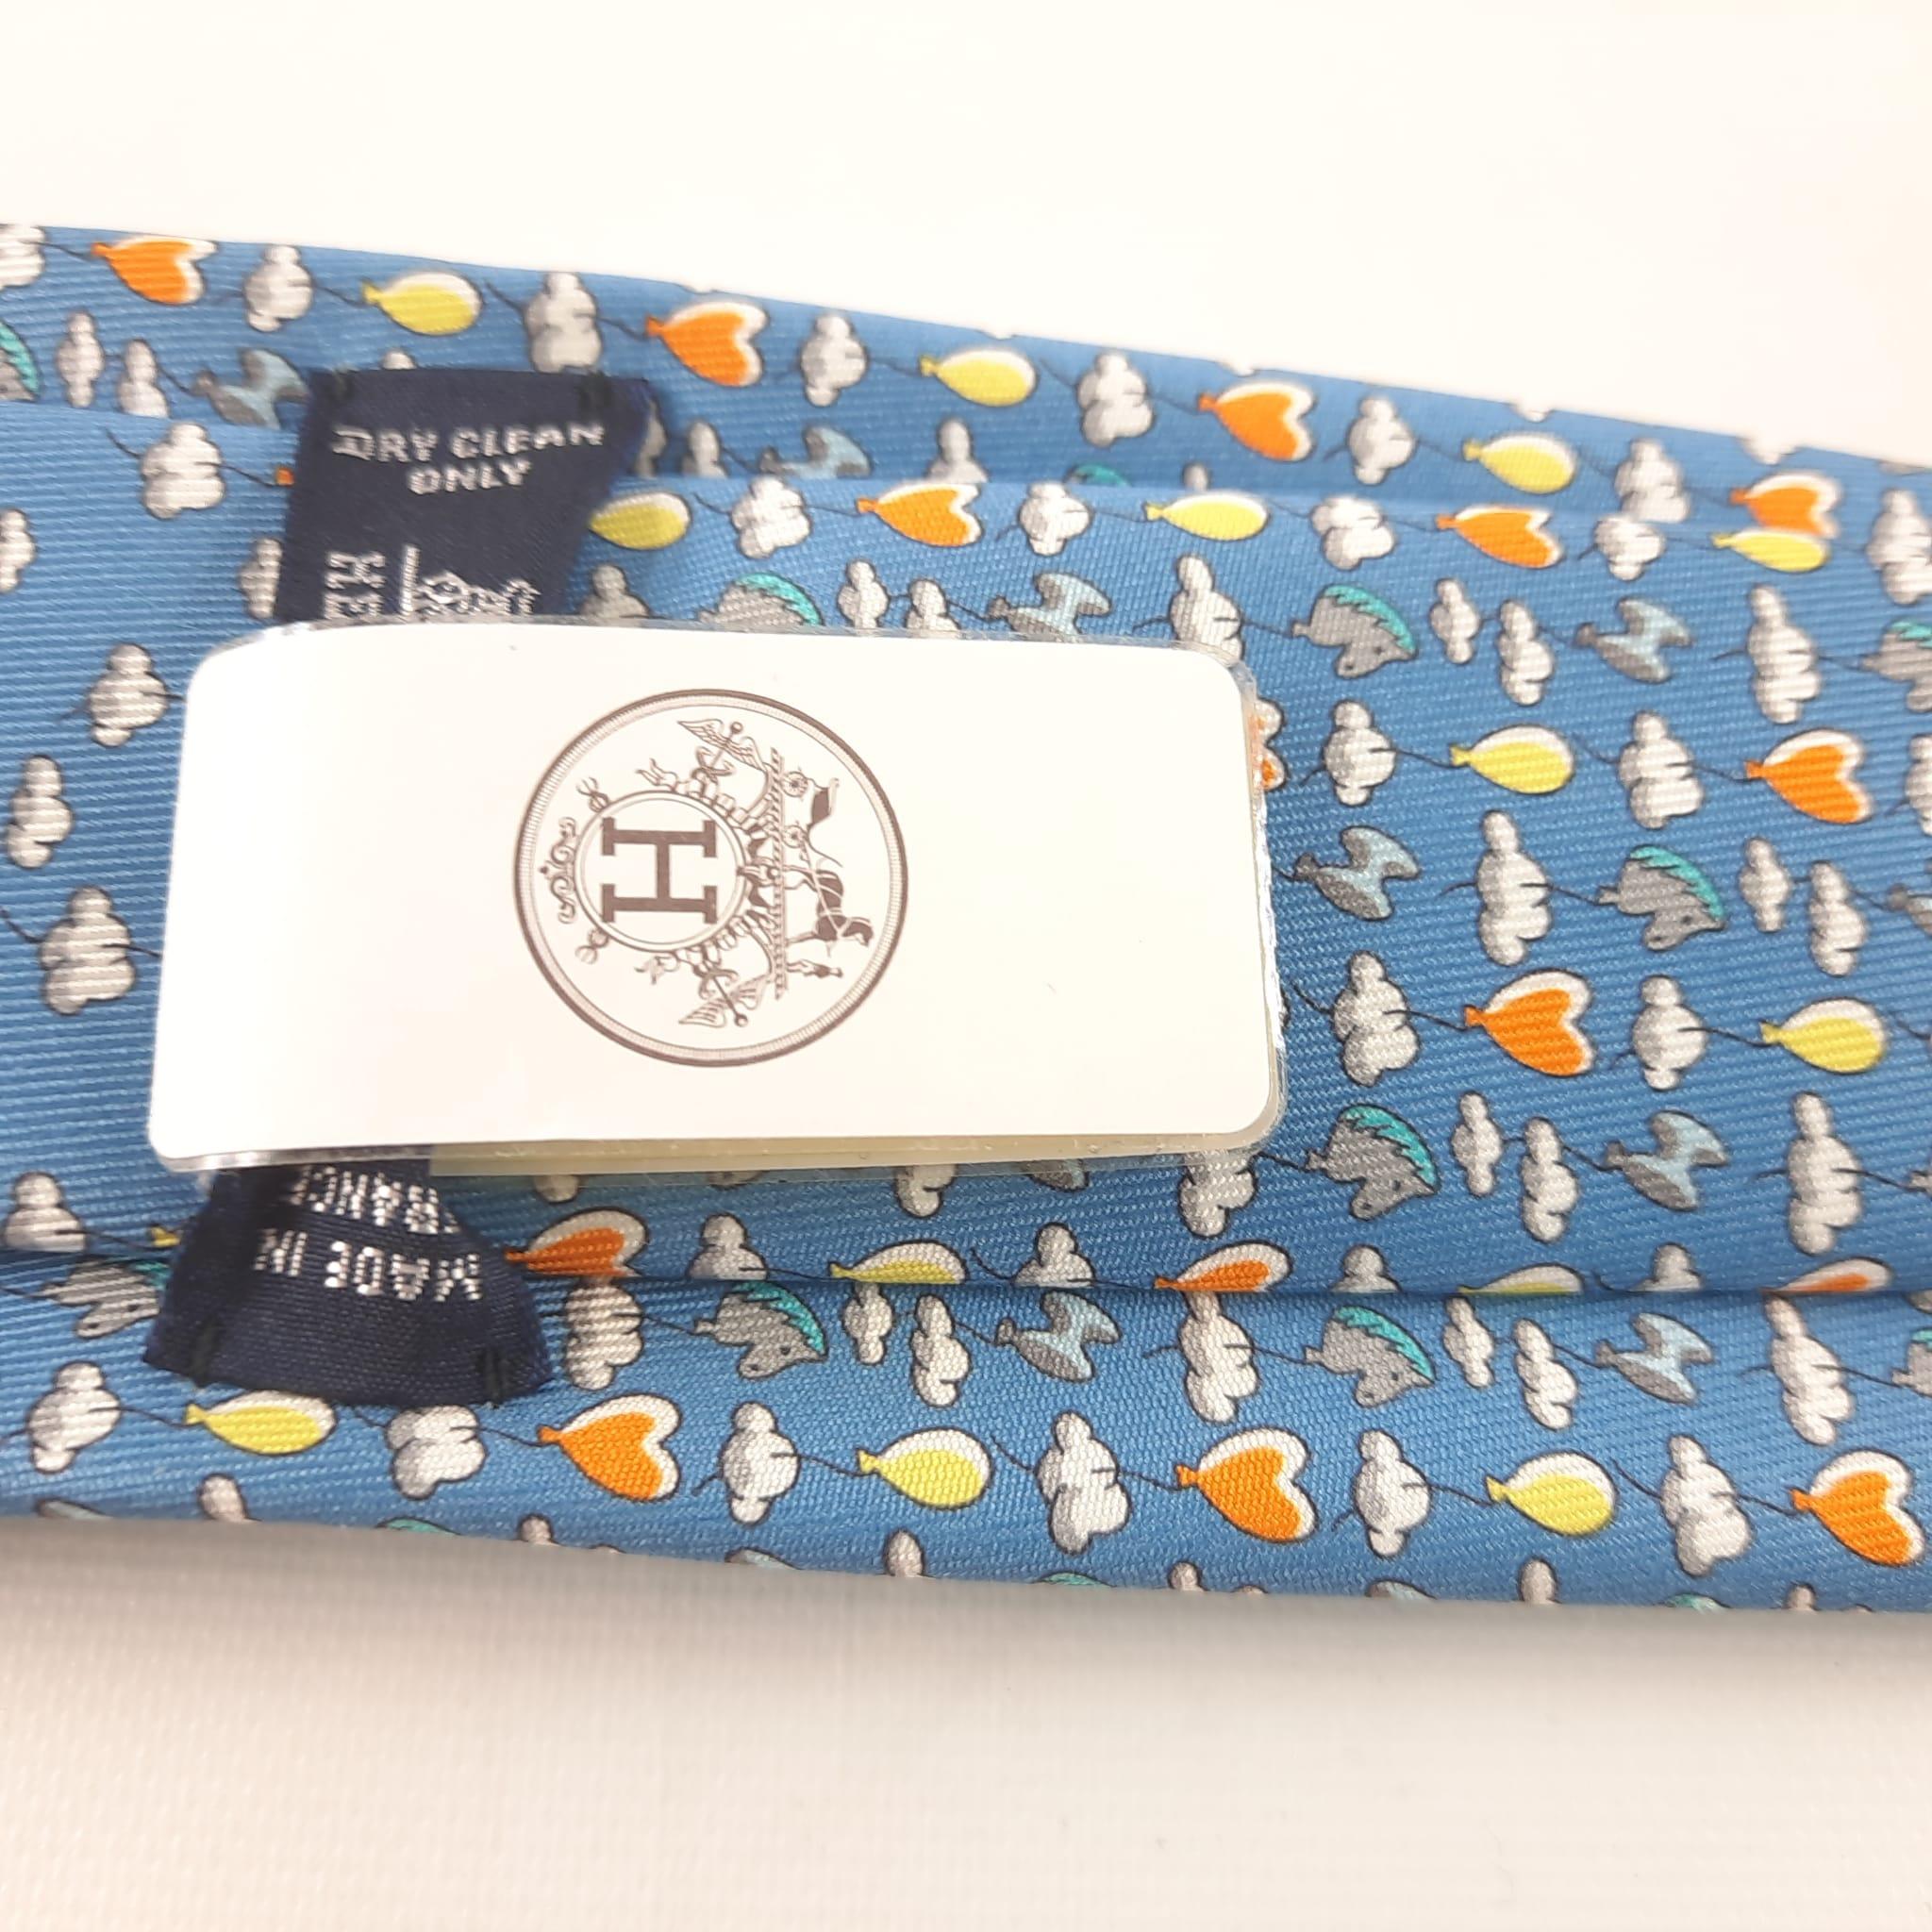 Hermes Bleu Clair / Gris / Orange Up In The Clouds tie For Sale 2